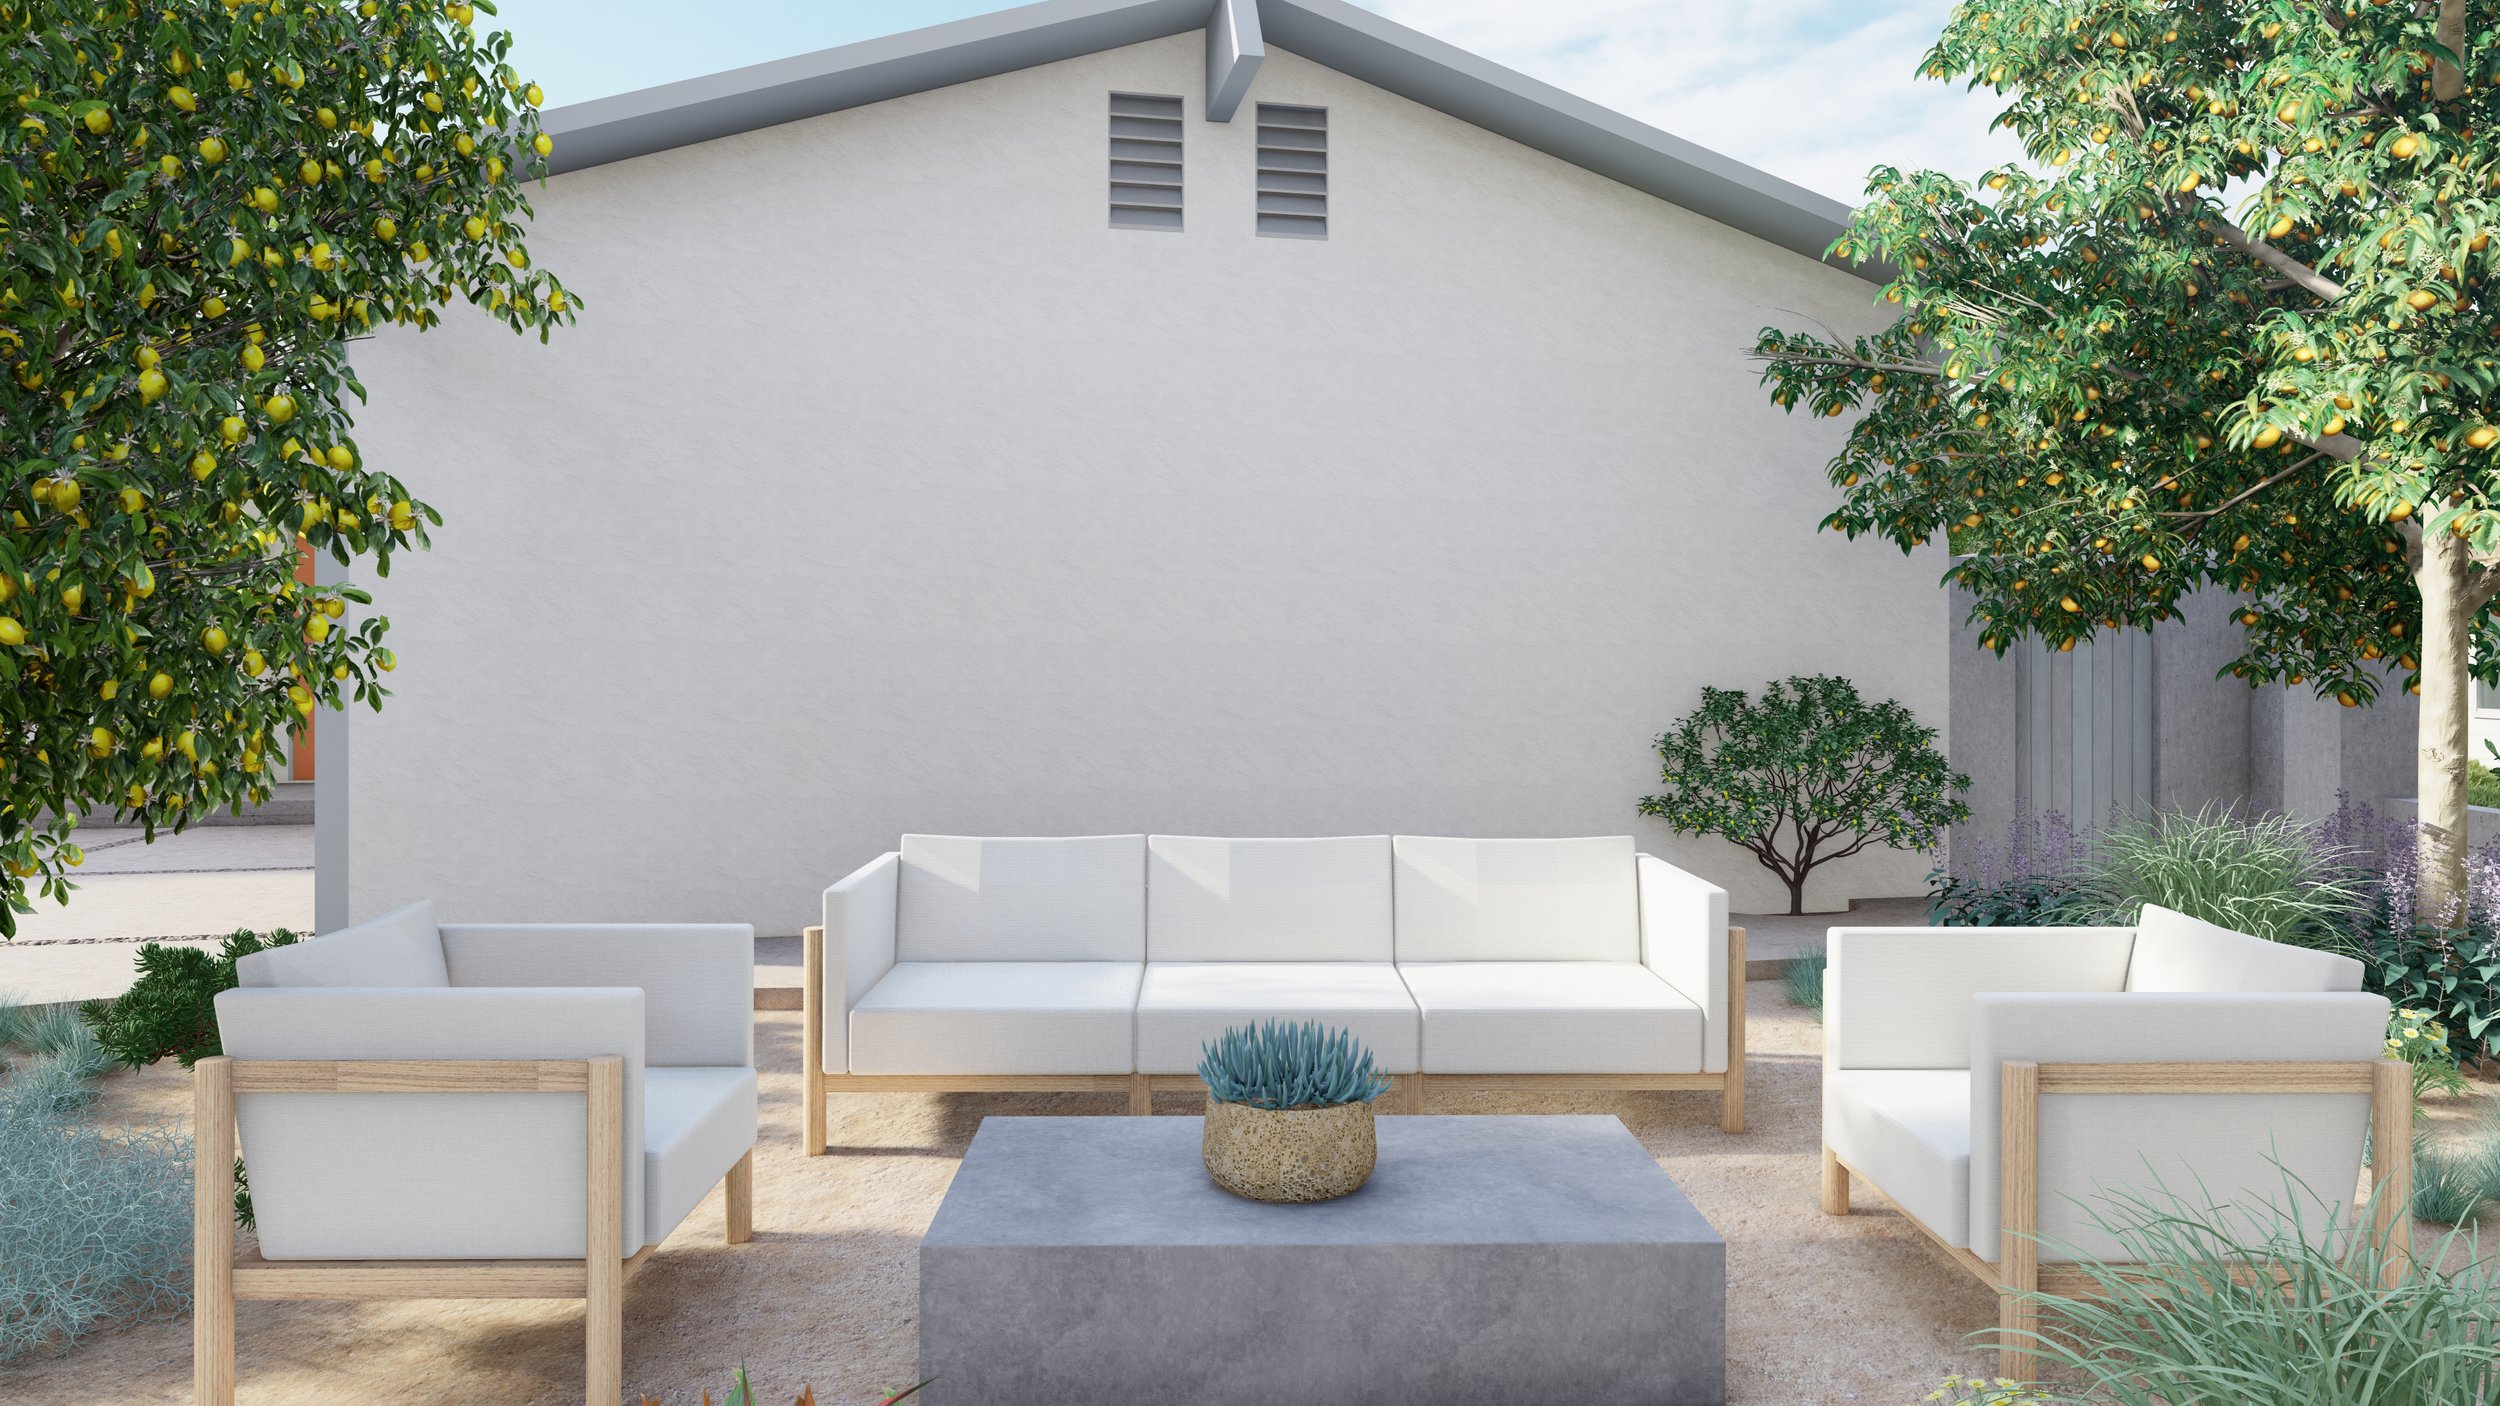 The Sofa and two chairs in California backyard design.